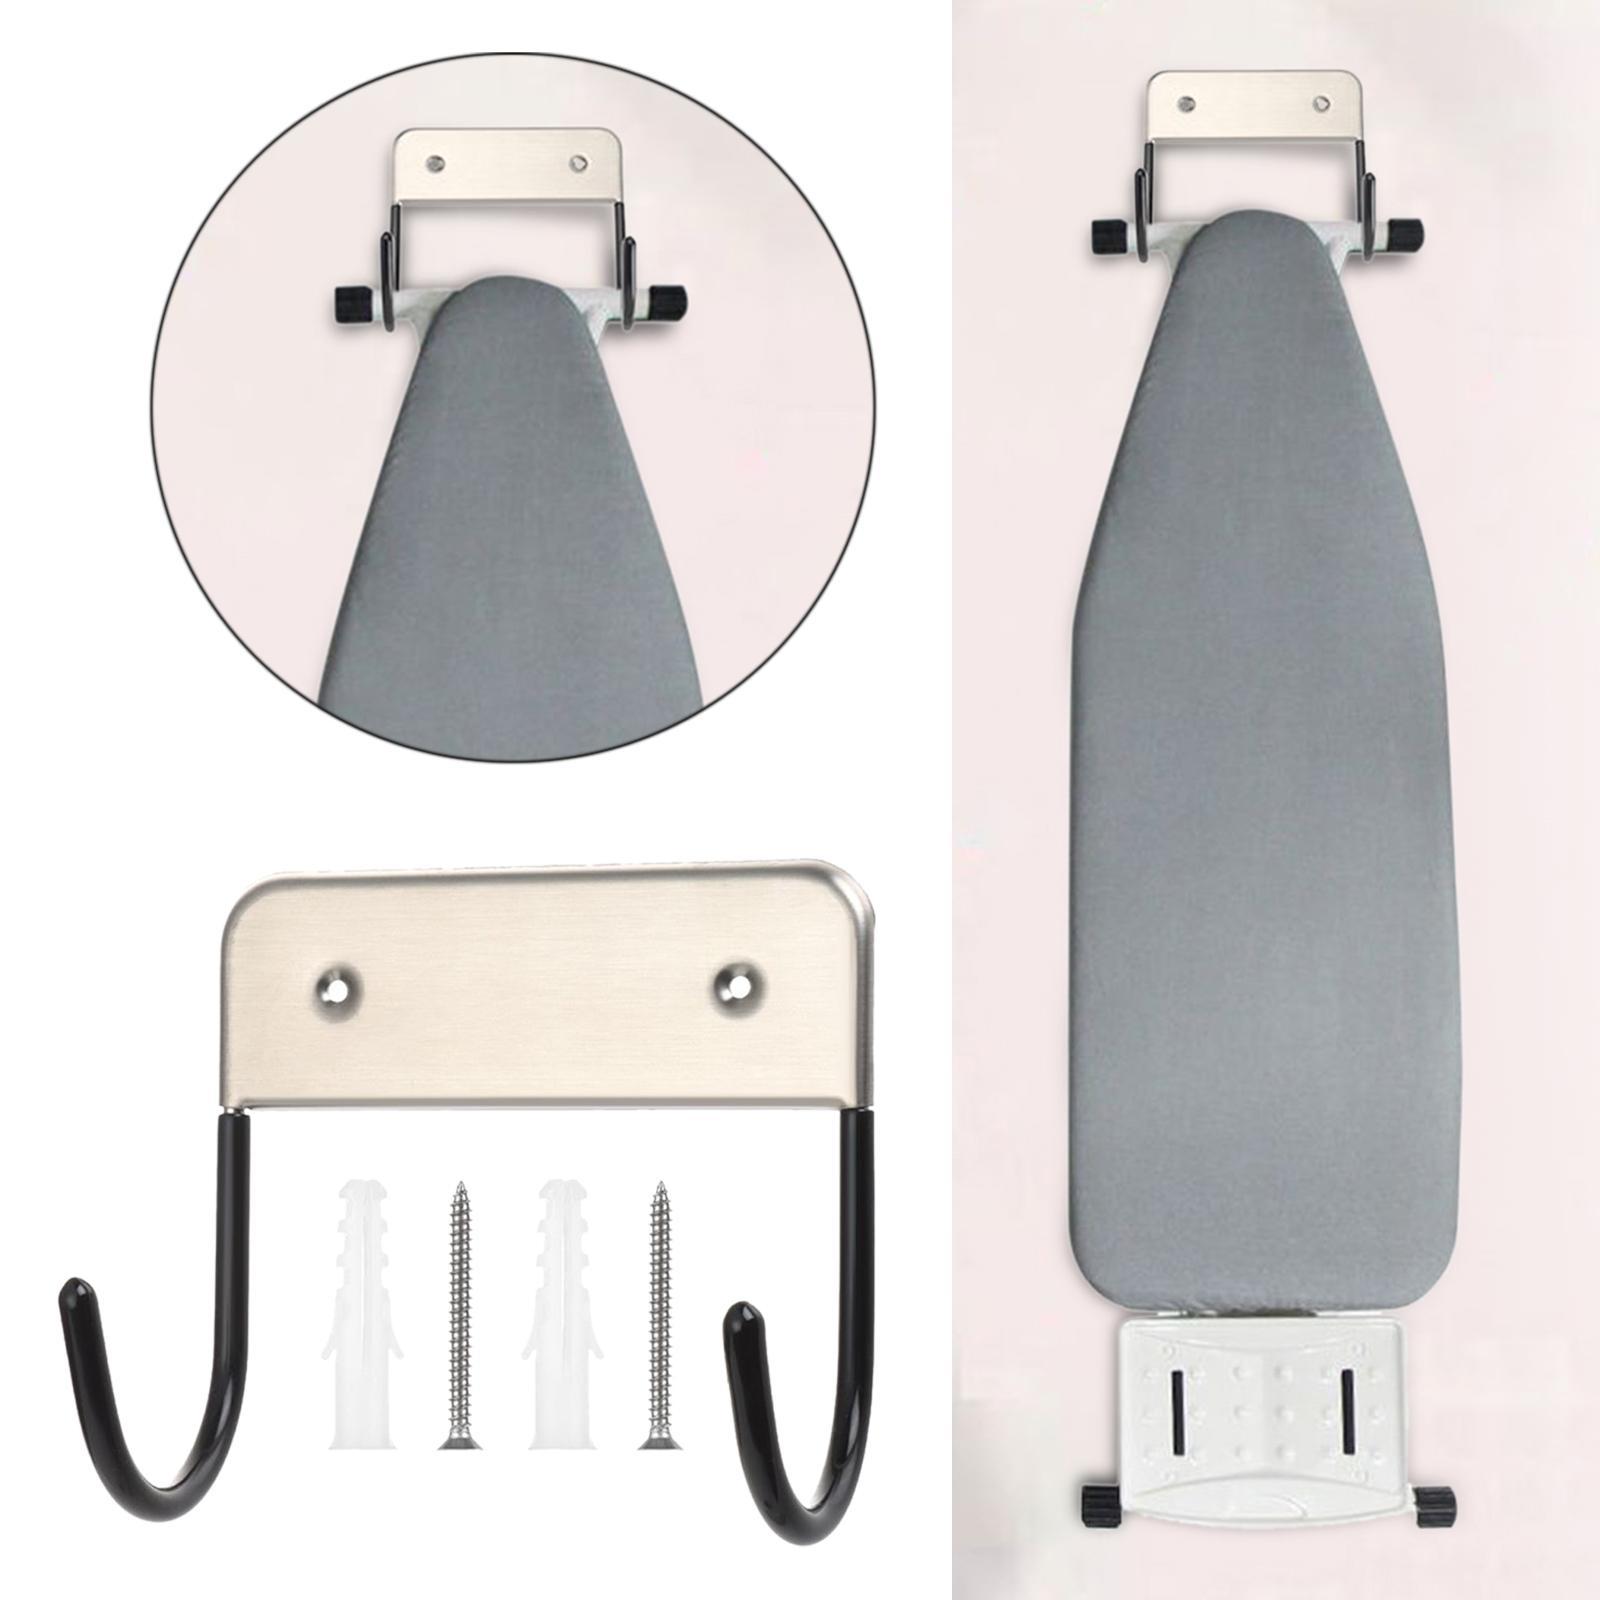 Home Ironing Board Holder Wall Hanging Removable for Home Door Bathroom